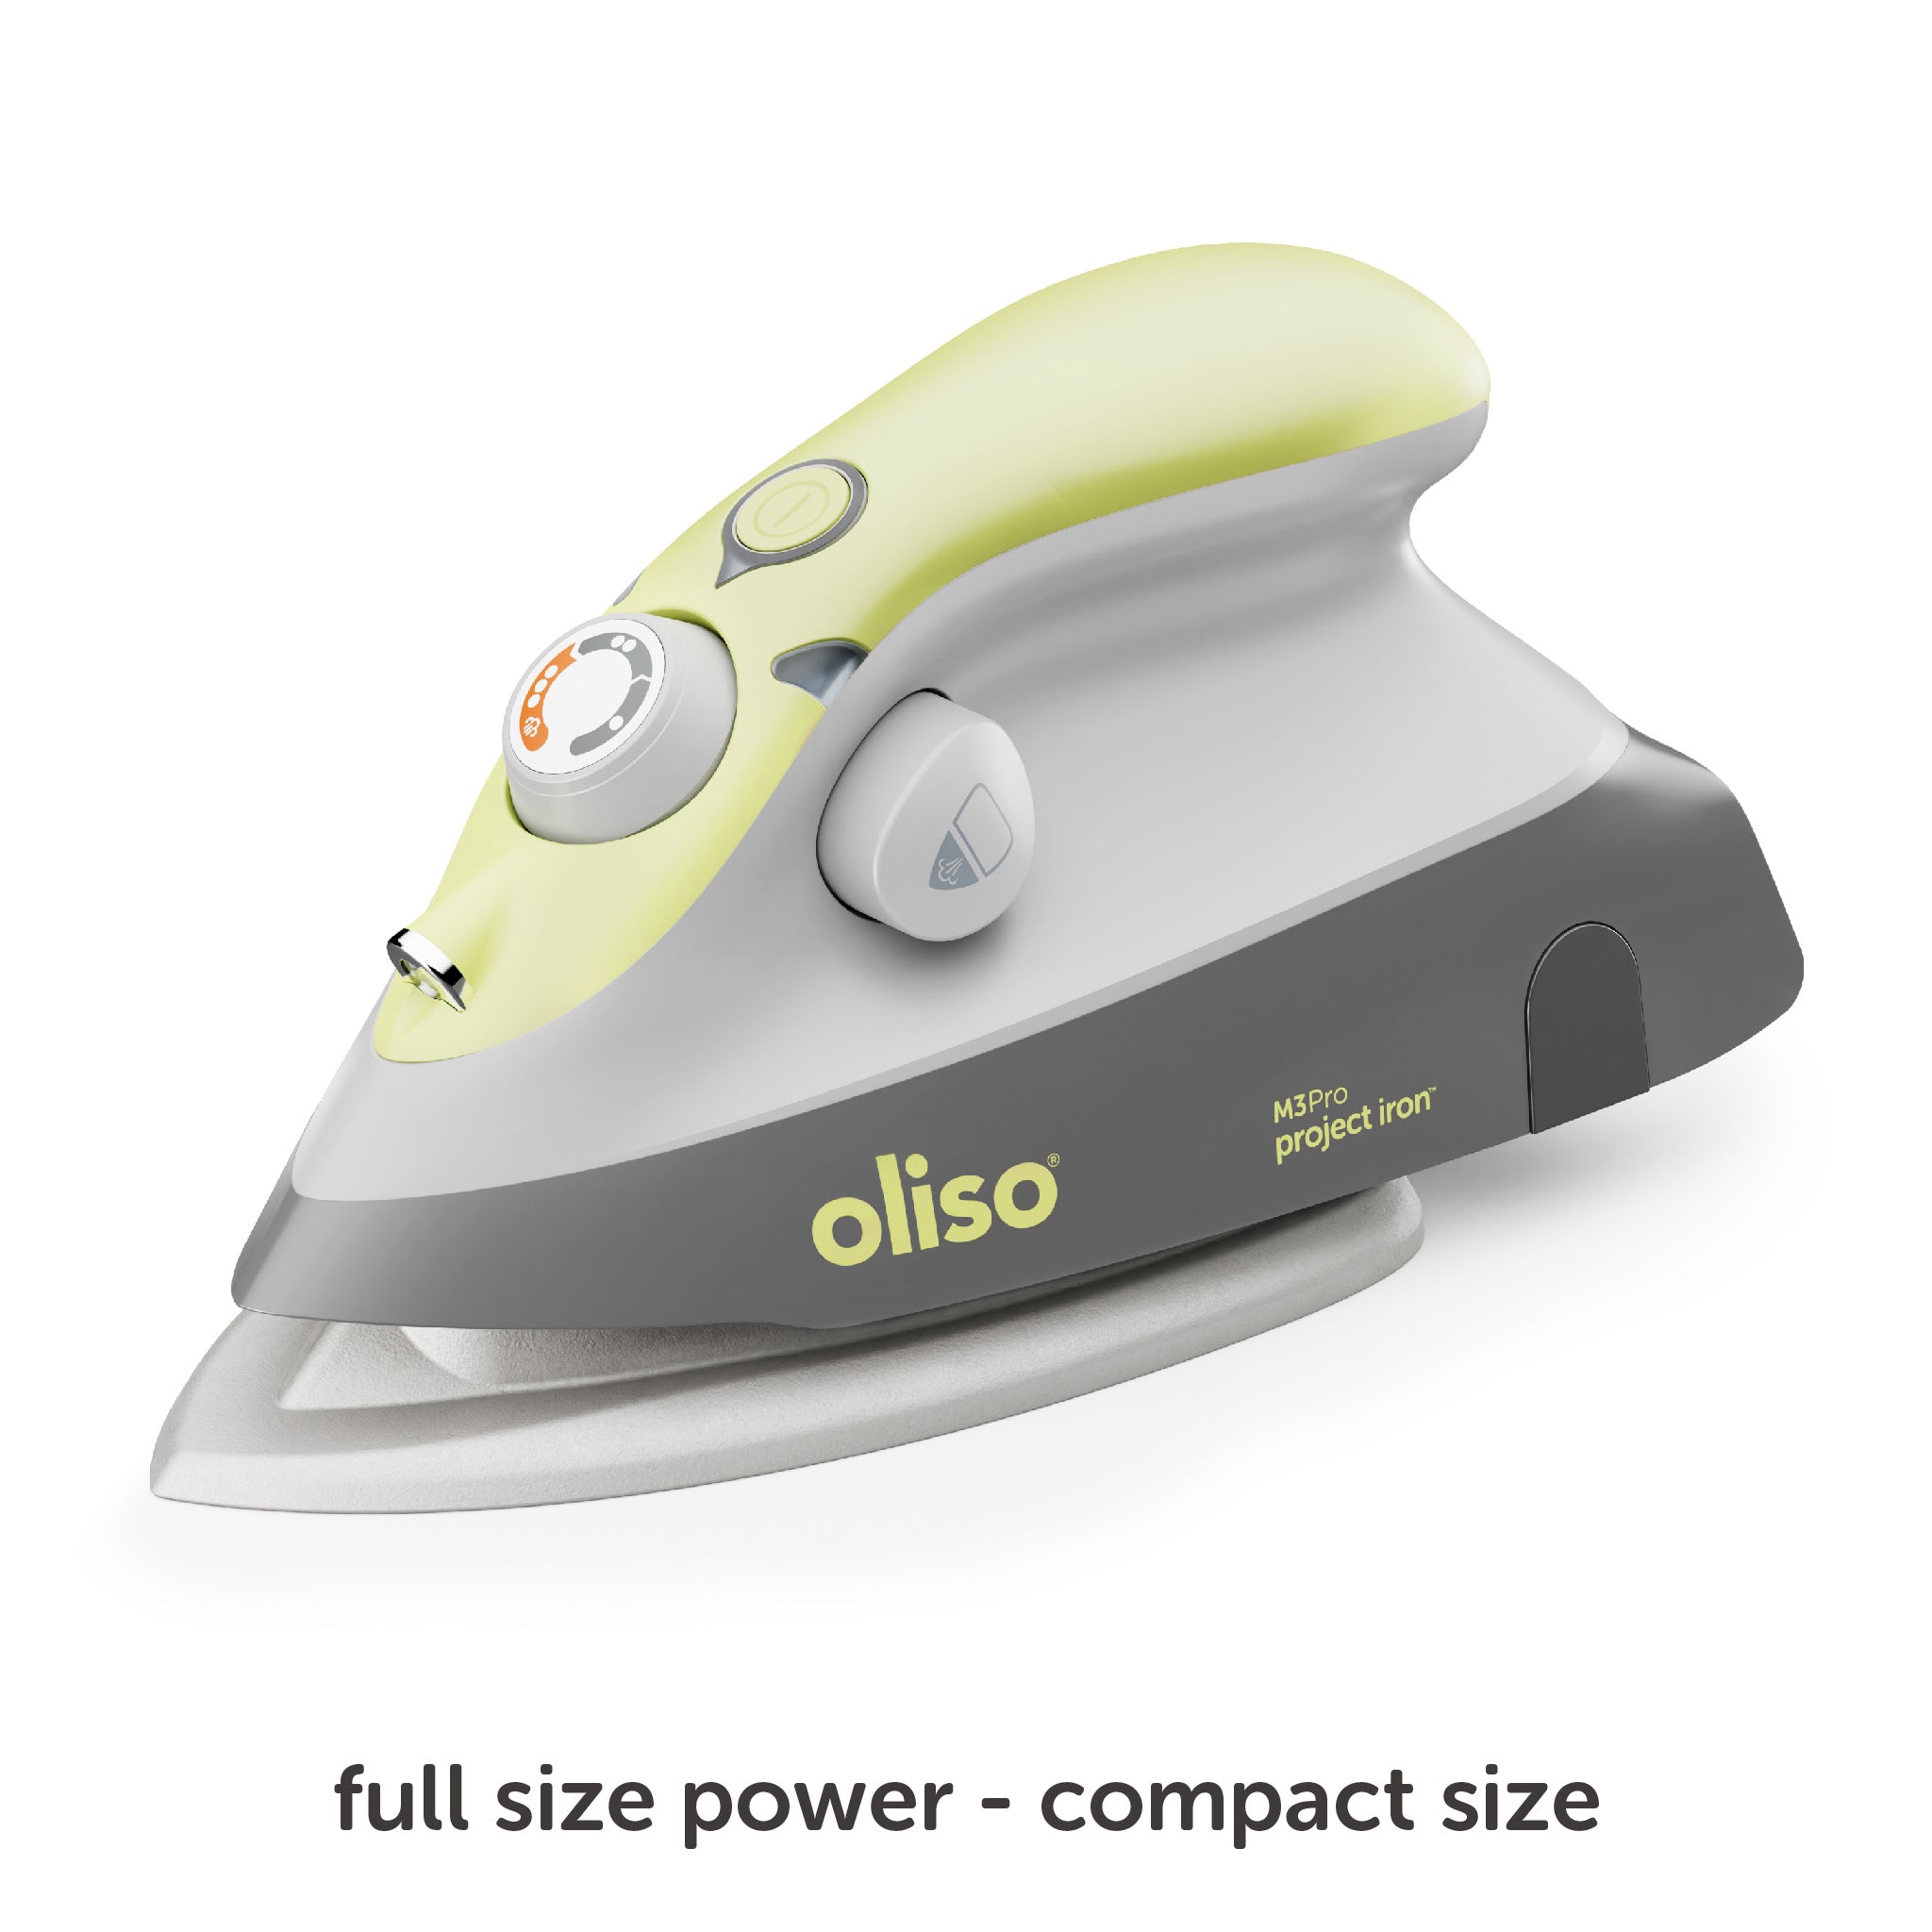 The pistachio M3Pro project iron provides full size power in a compact convenient size.